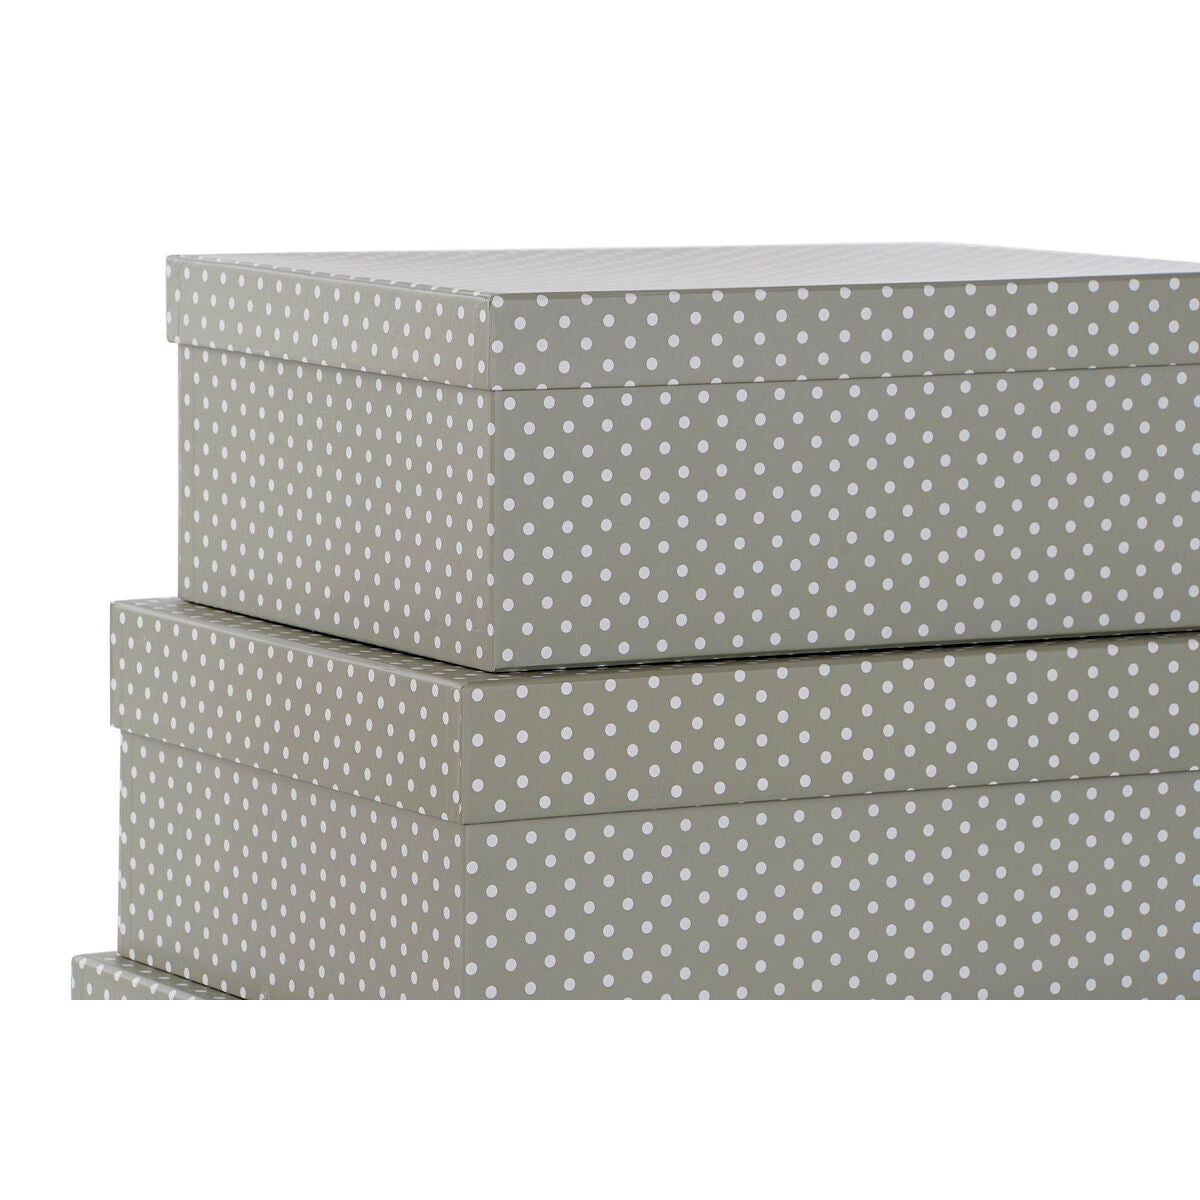 Set of Stackable Organising Boxes DKD Home Decor Mouse Grey White Cardboard (43,5 x 33,5 x 15,5 cm)